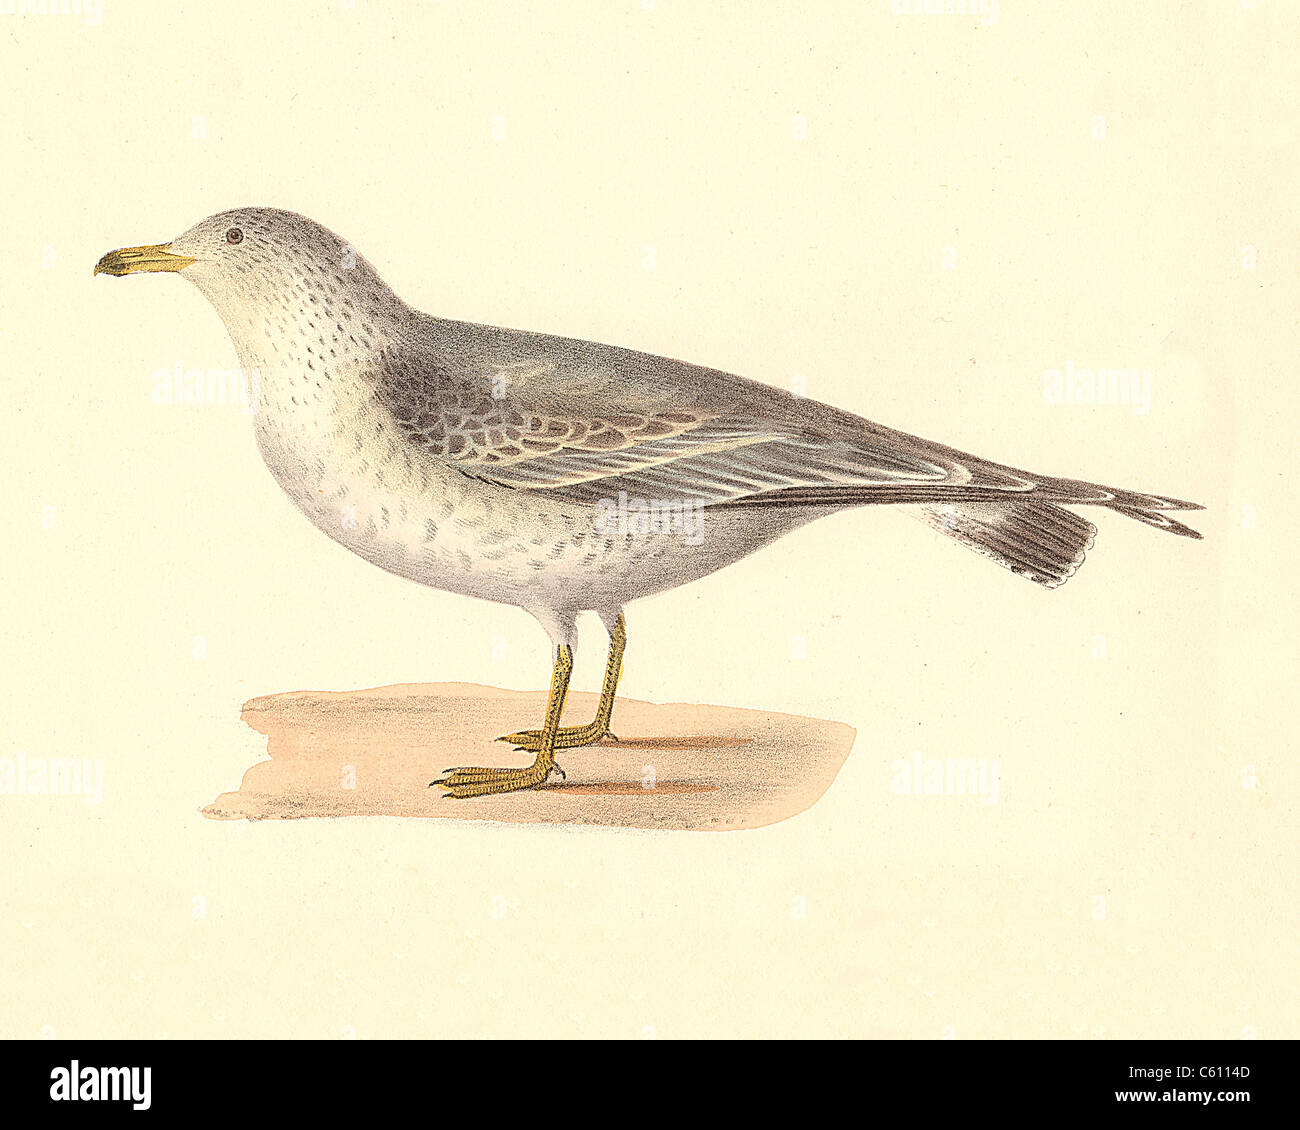 The Common American Gull, The Common Gull, Mew Gull (Larus zonorhyncus, Larus canus) vintage bird lithograph, James De Kay, Zoology of NY, Birds Stock Photo